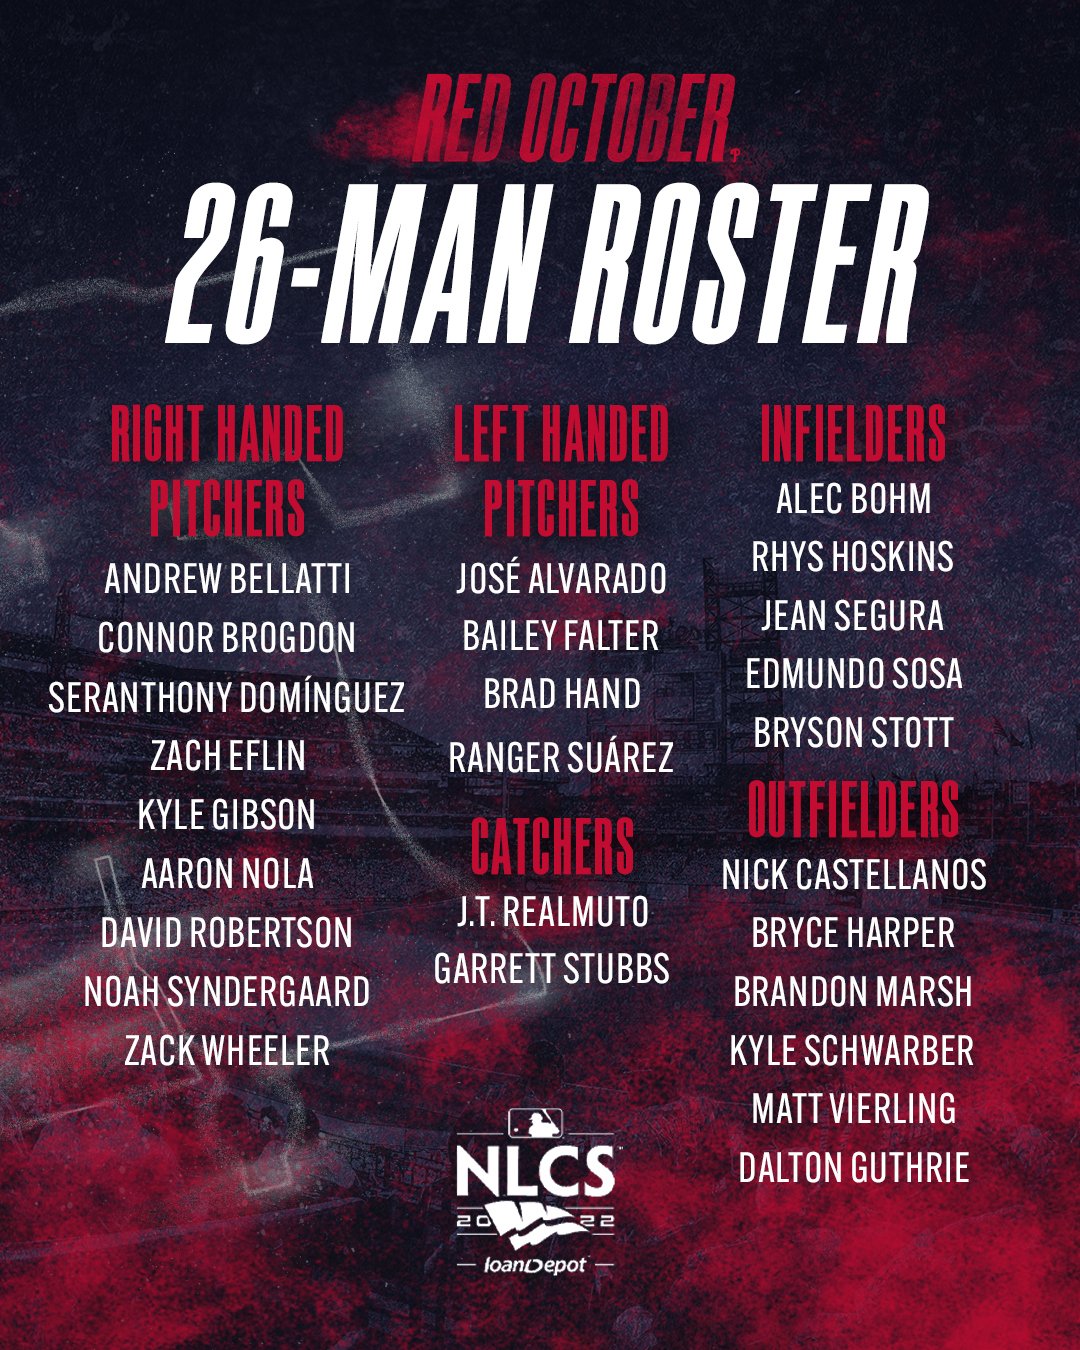 Philadelphia Phillies on X: Our NLCS roster is set! #RedOctober